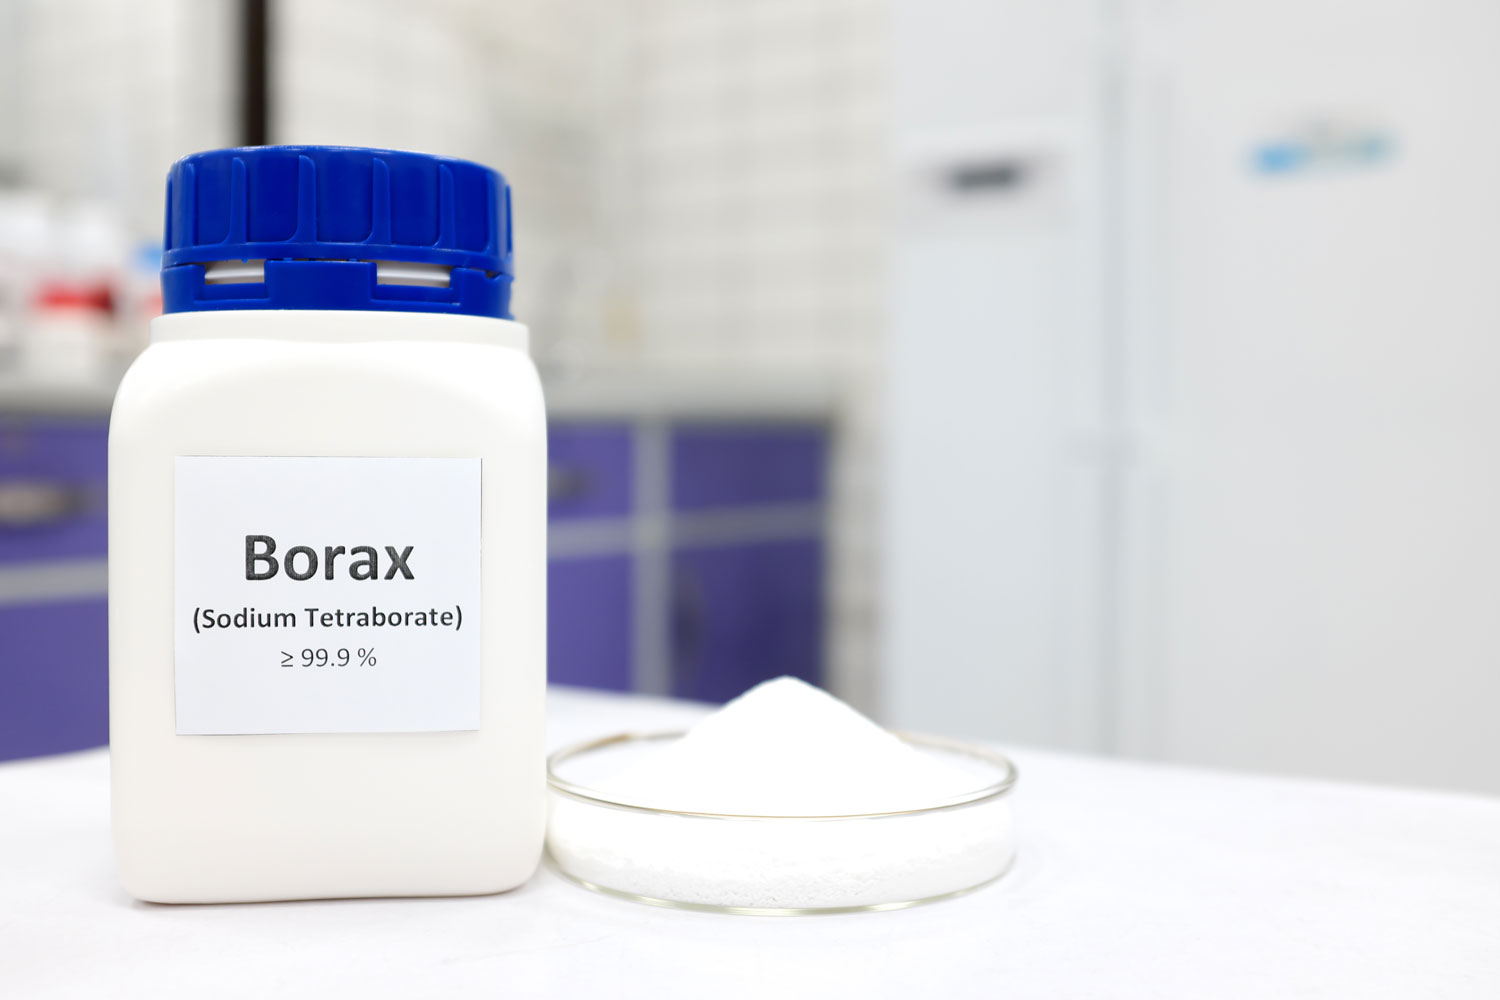 Putting Borax in the kitchen